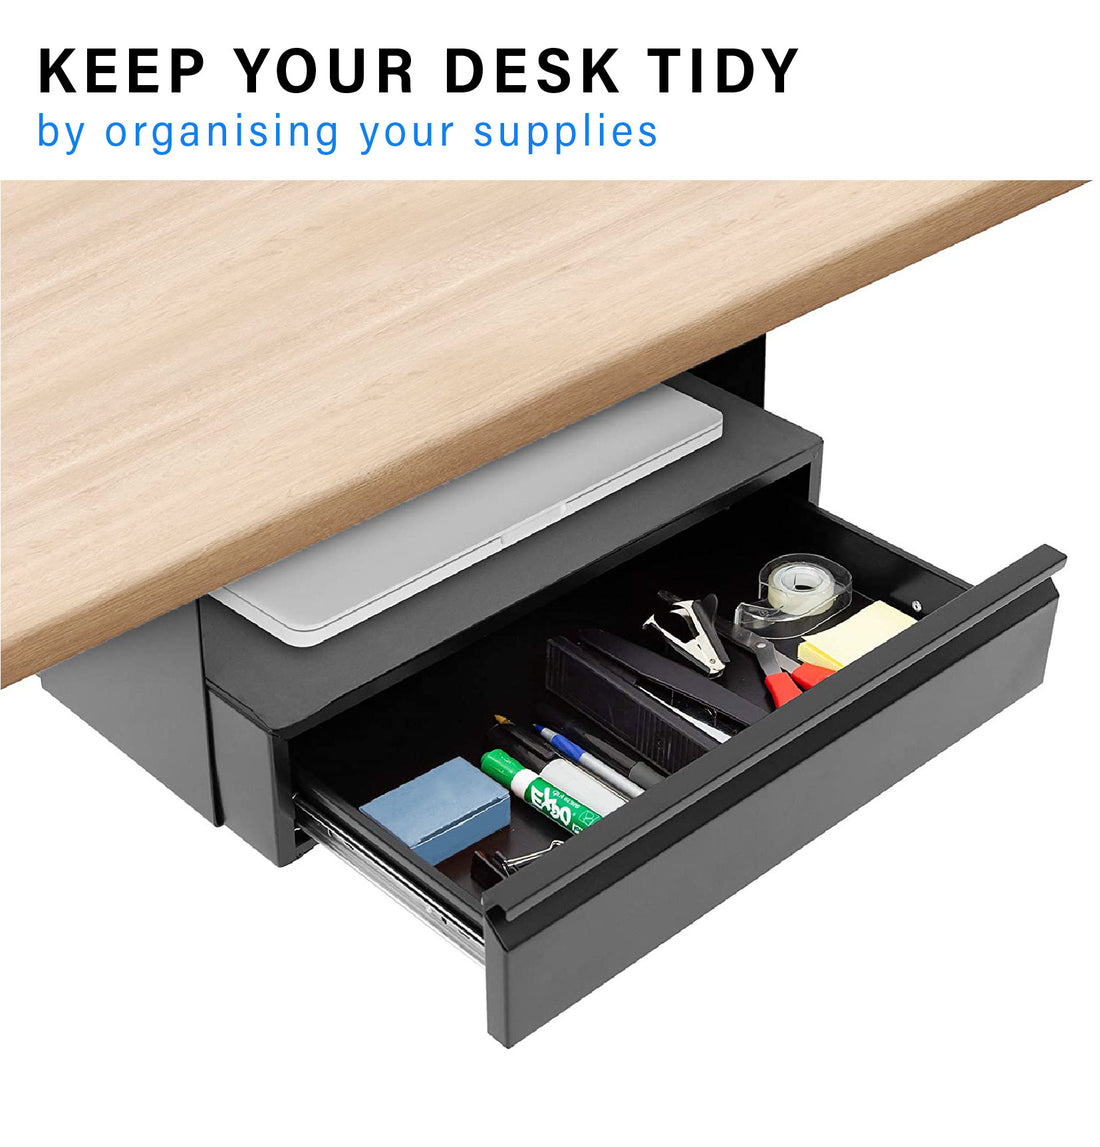 ULTi Under Desk Pull-Out Drawer with Laptop Shelf, Mounted Office Storage Organizer Cabinet for Standing Desk Table 45cm